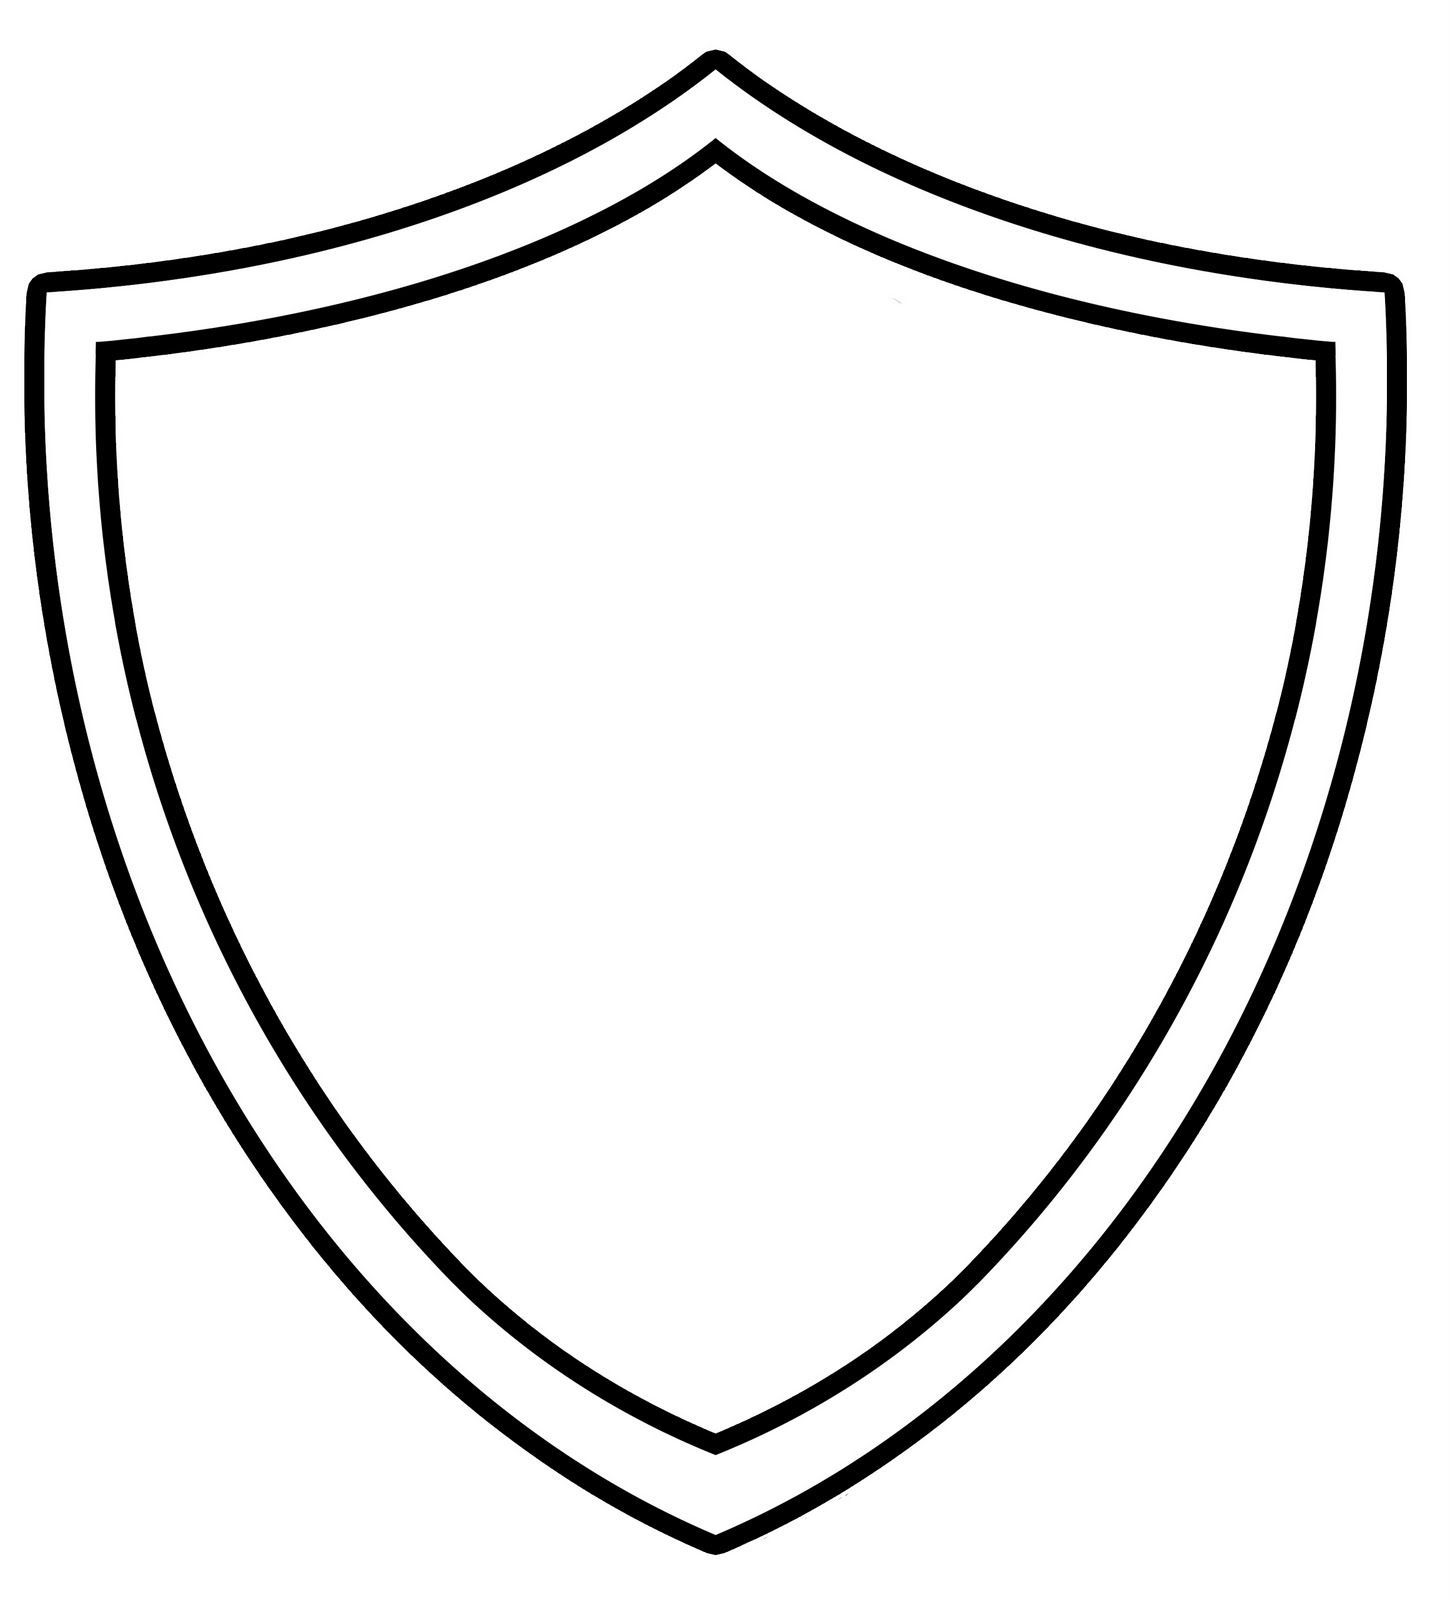 Medieval Shield Coloring Pages at GetColorings.com | Free ...